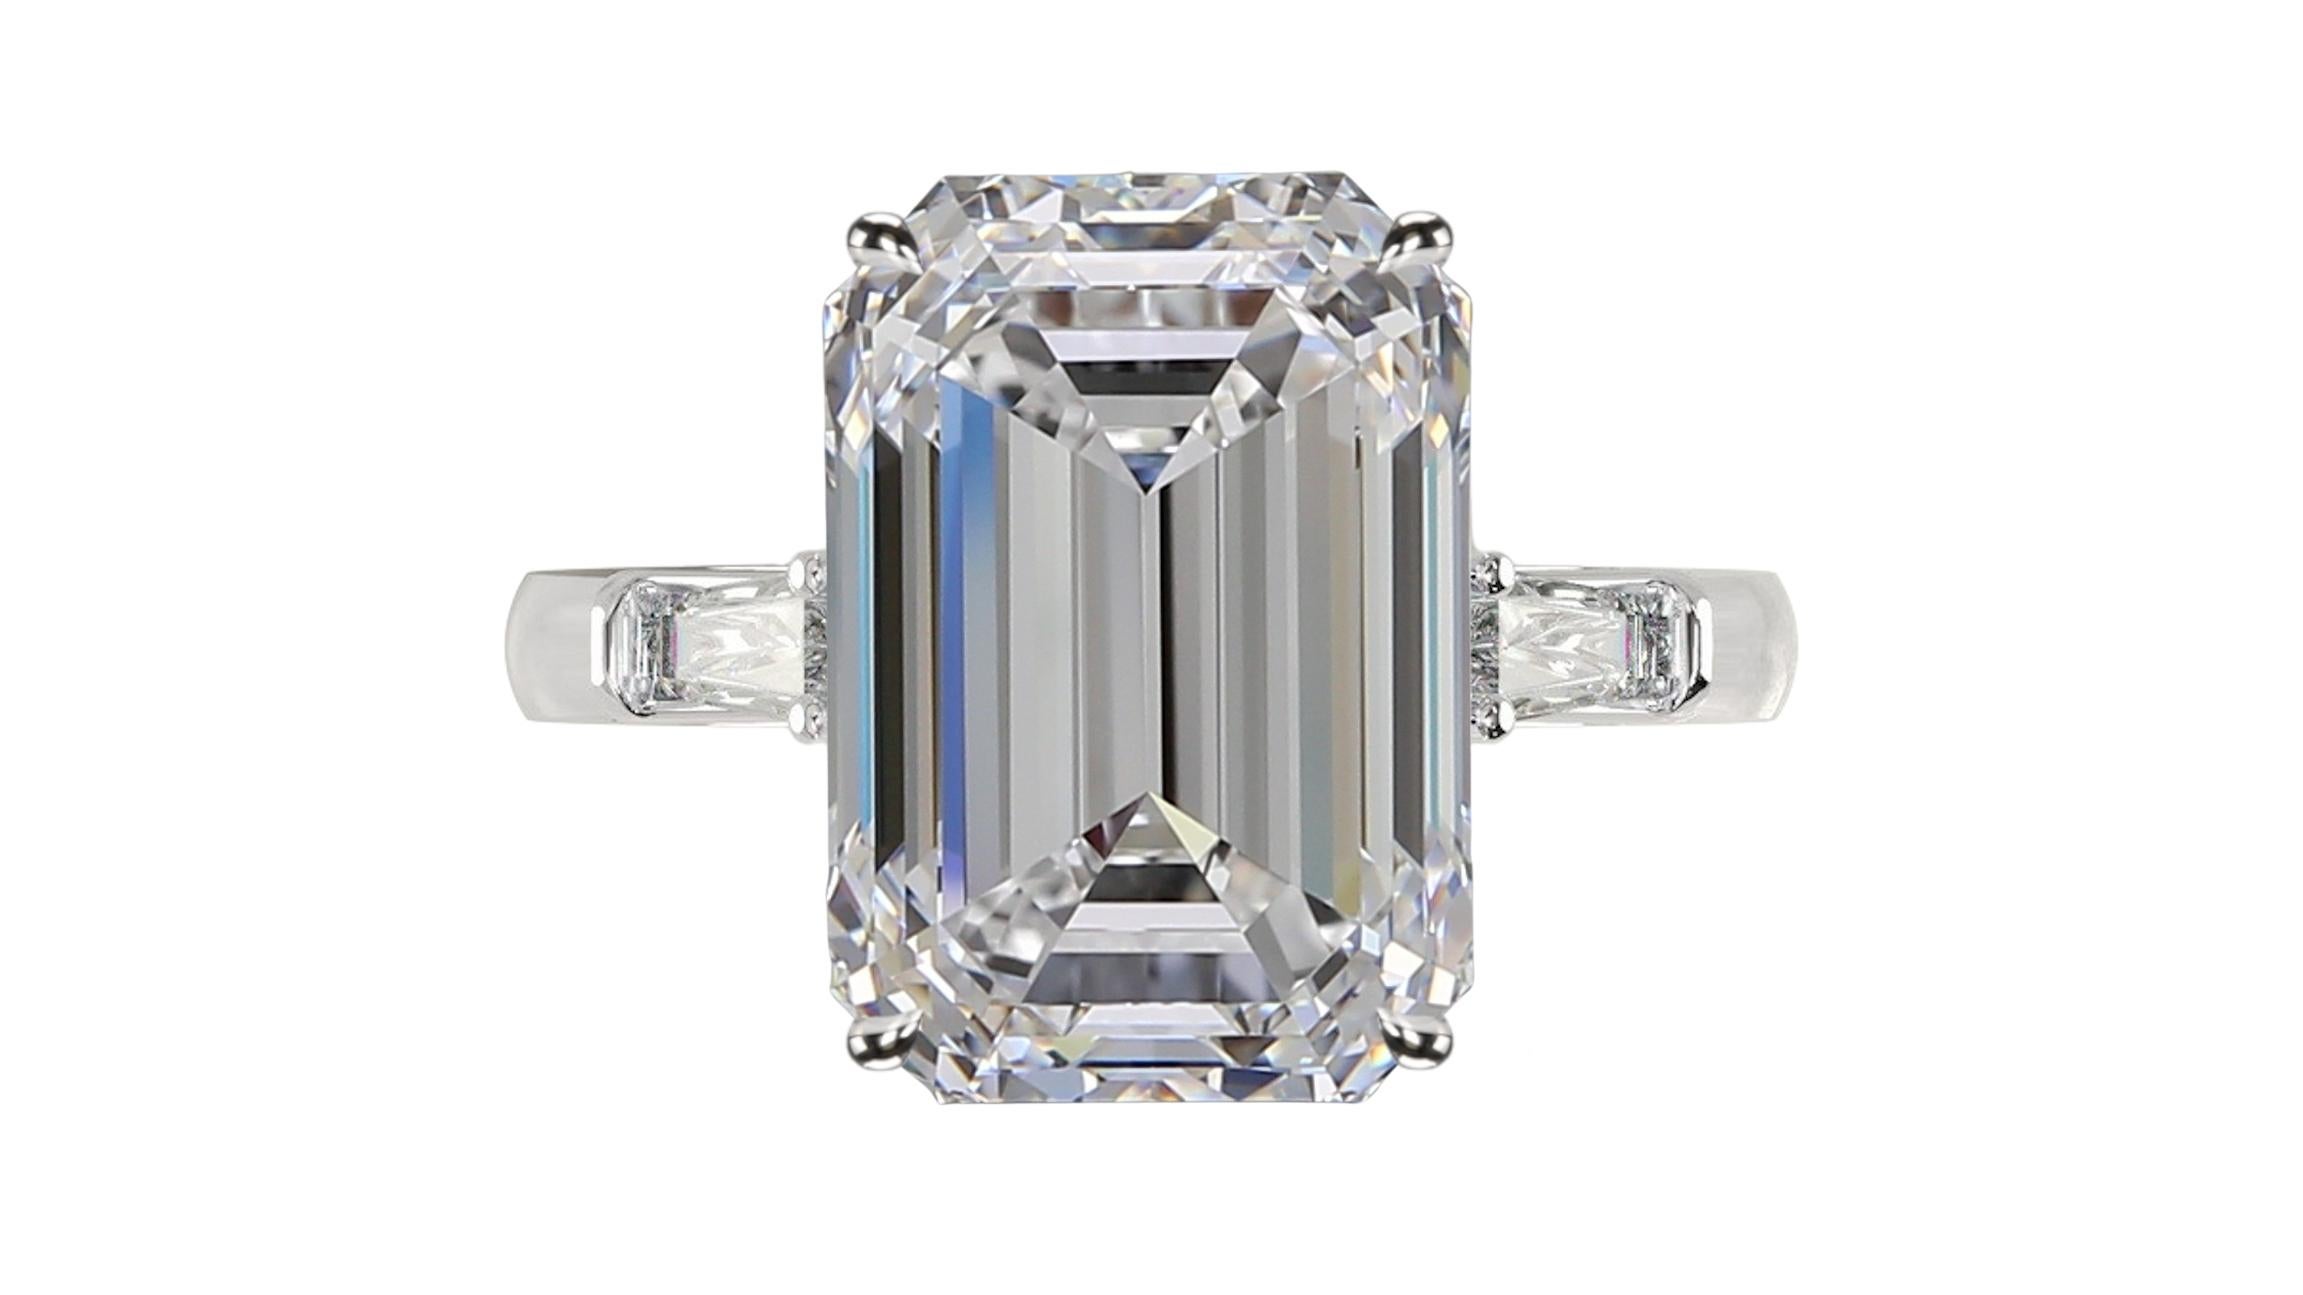 Amazing emerald cut diamond ring the main stone is an exquisite 3 carat emerald cut diamond with H color and Flawless clarity plus excellent polish and symmetry and none fluorescence.

the side diamonds are tapered baguette and very pure 

mounted